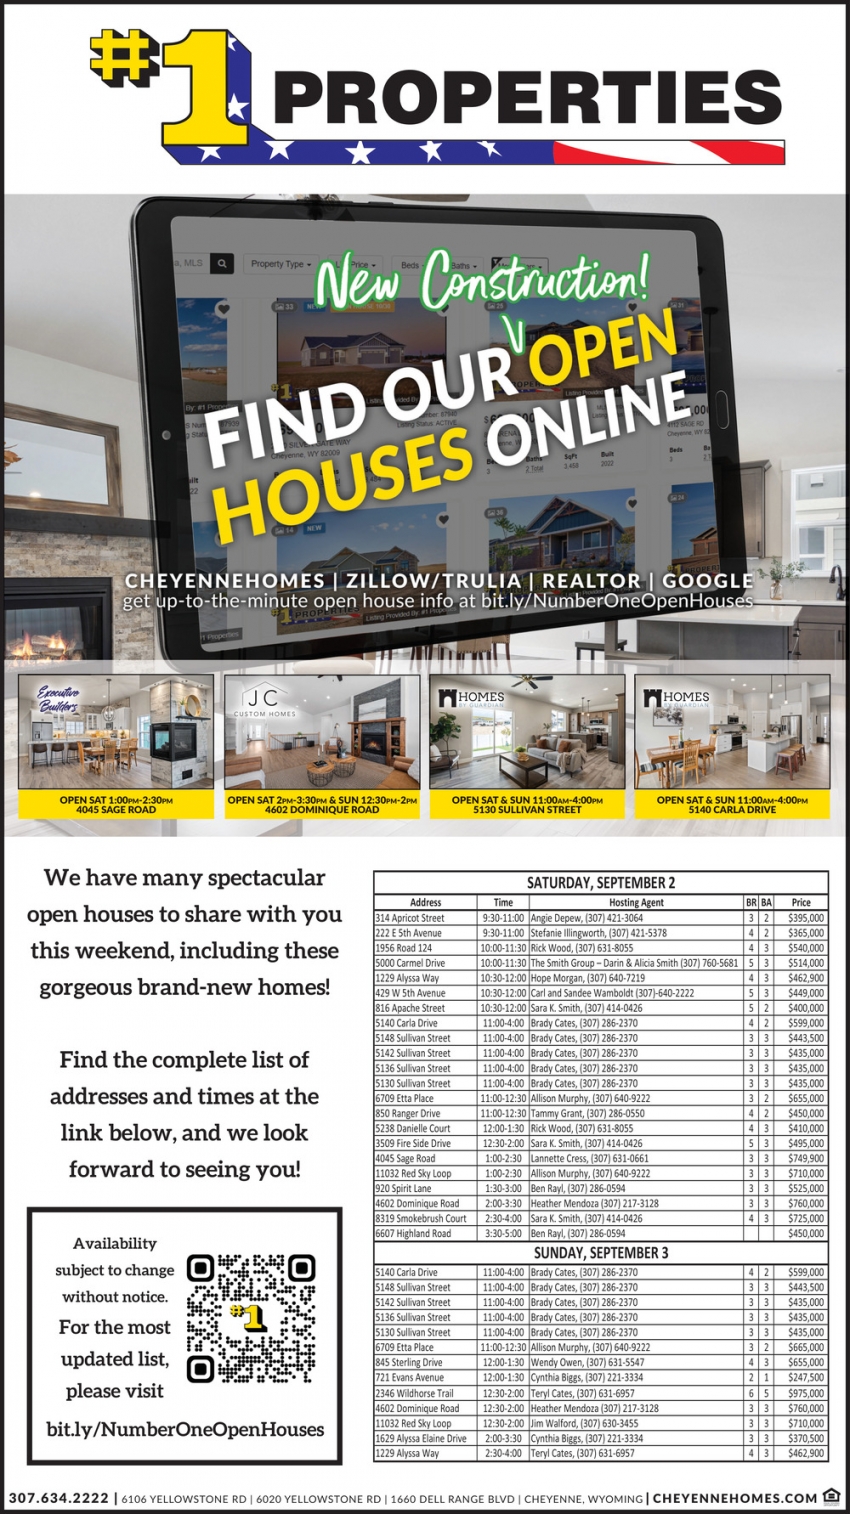 Find Our Open Houses Online